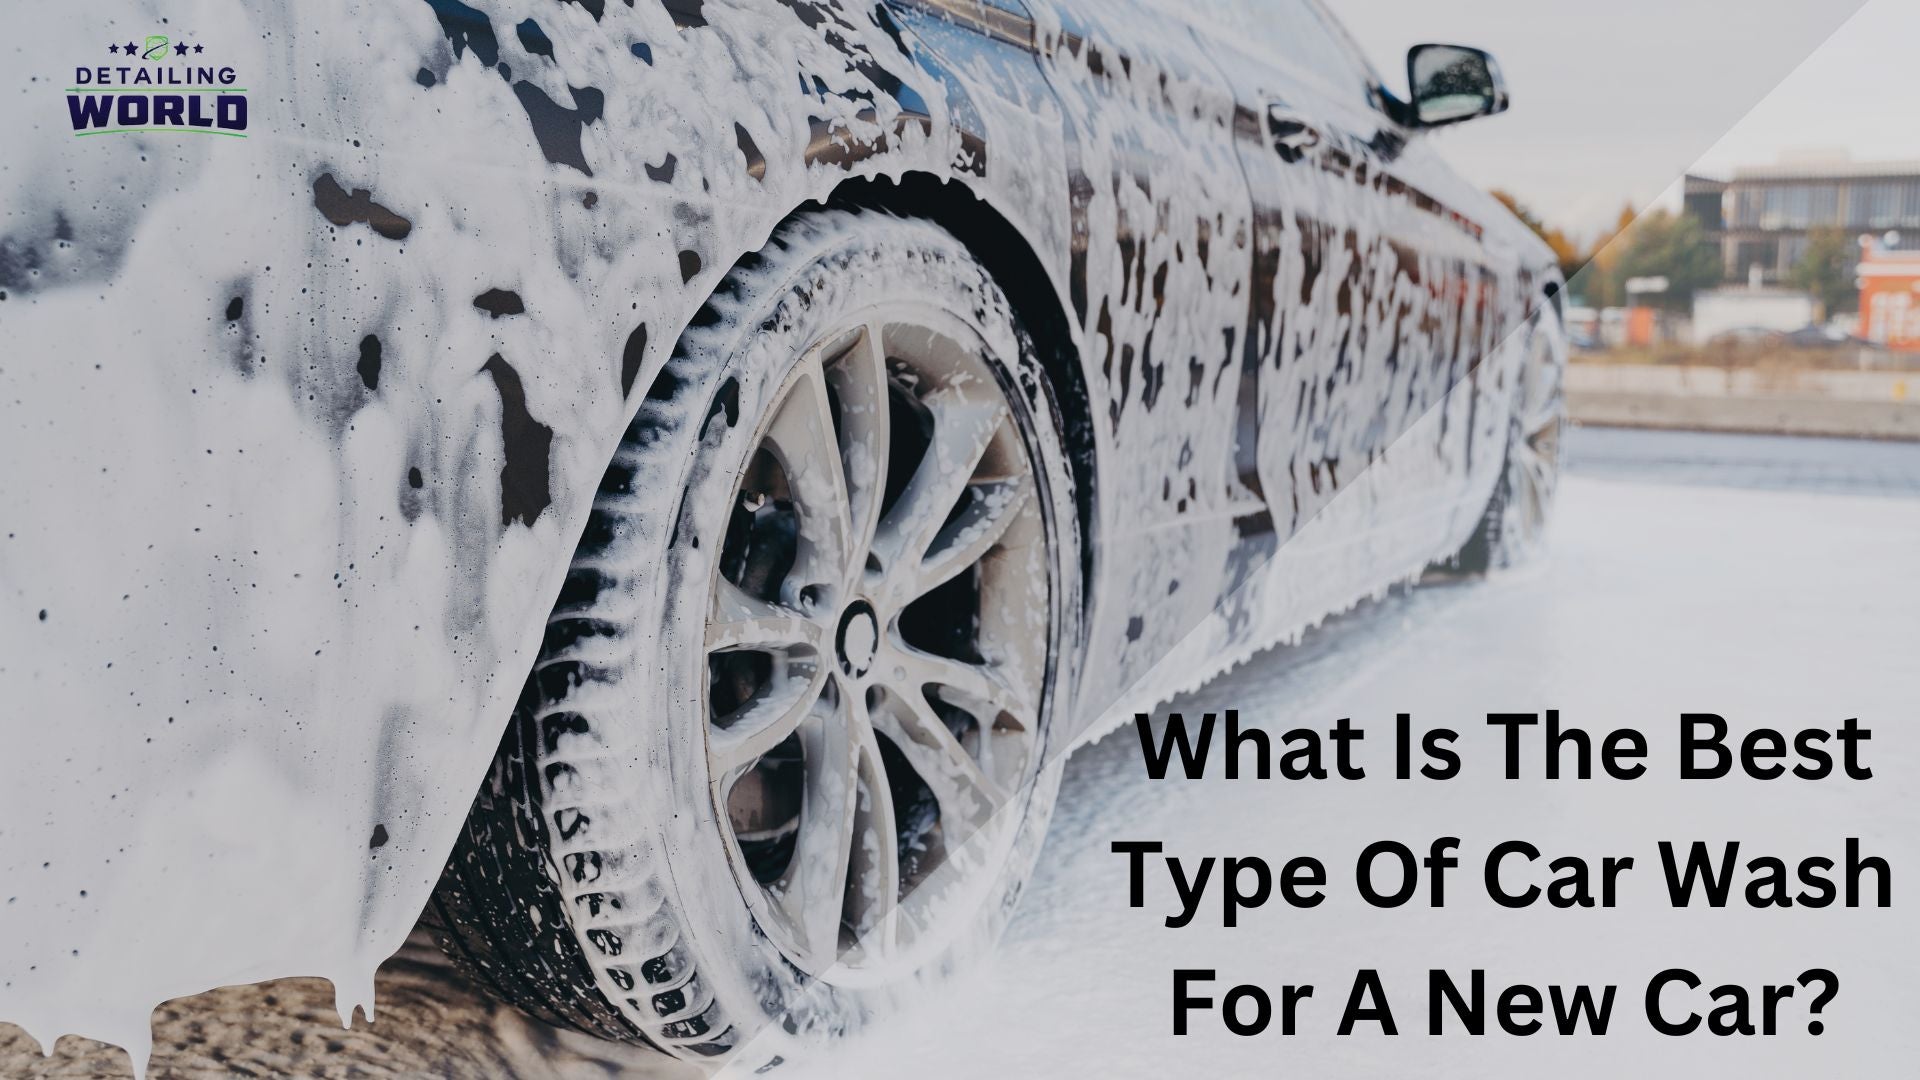 What Is The Best Type Of Car Wash For A New Car? - Detailing World